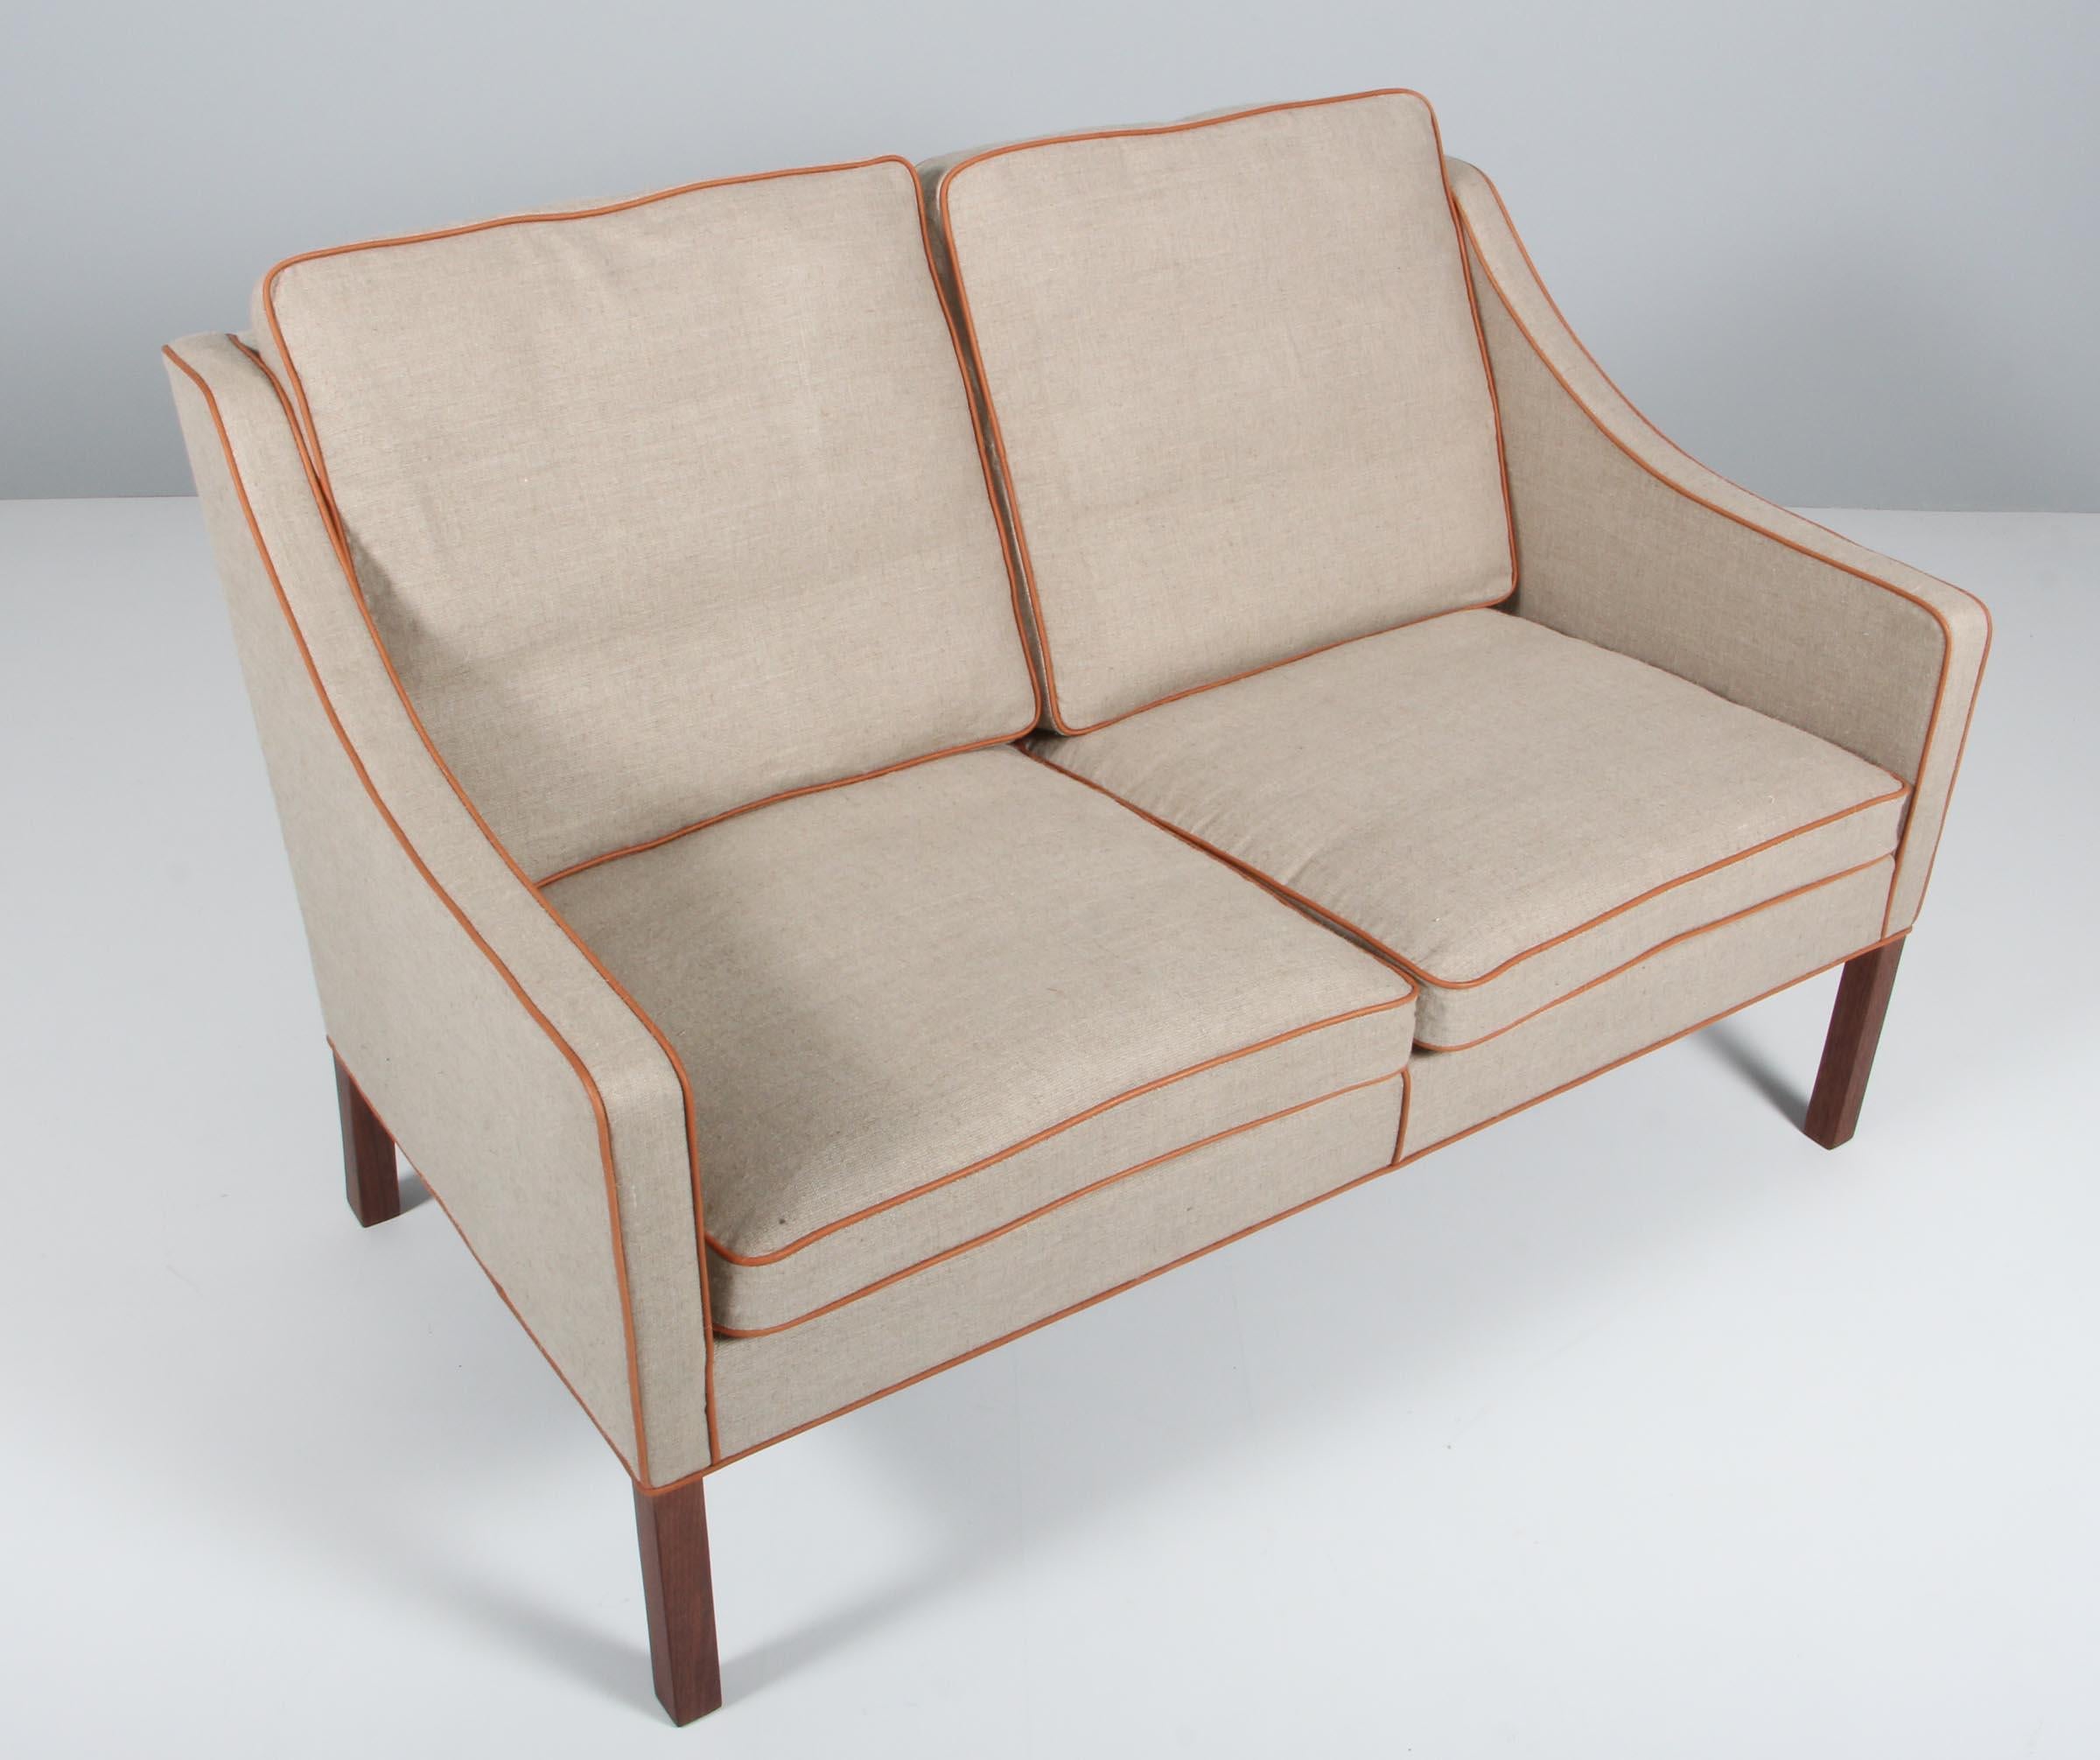 Børge Mogensen two-seat sofa new upholstered with canvas and tan aniline leather.

Legs of mahogany.

Model 2209, made by Fredericia furniture.